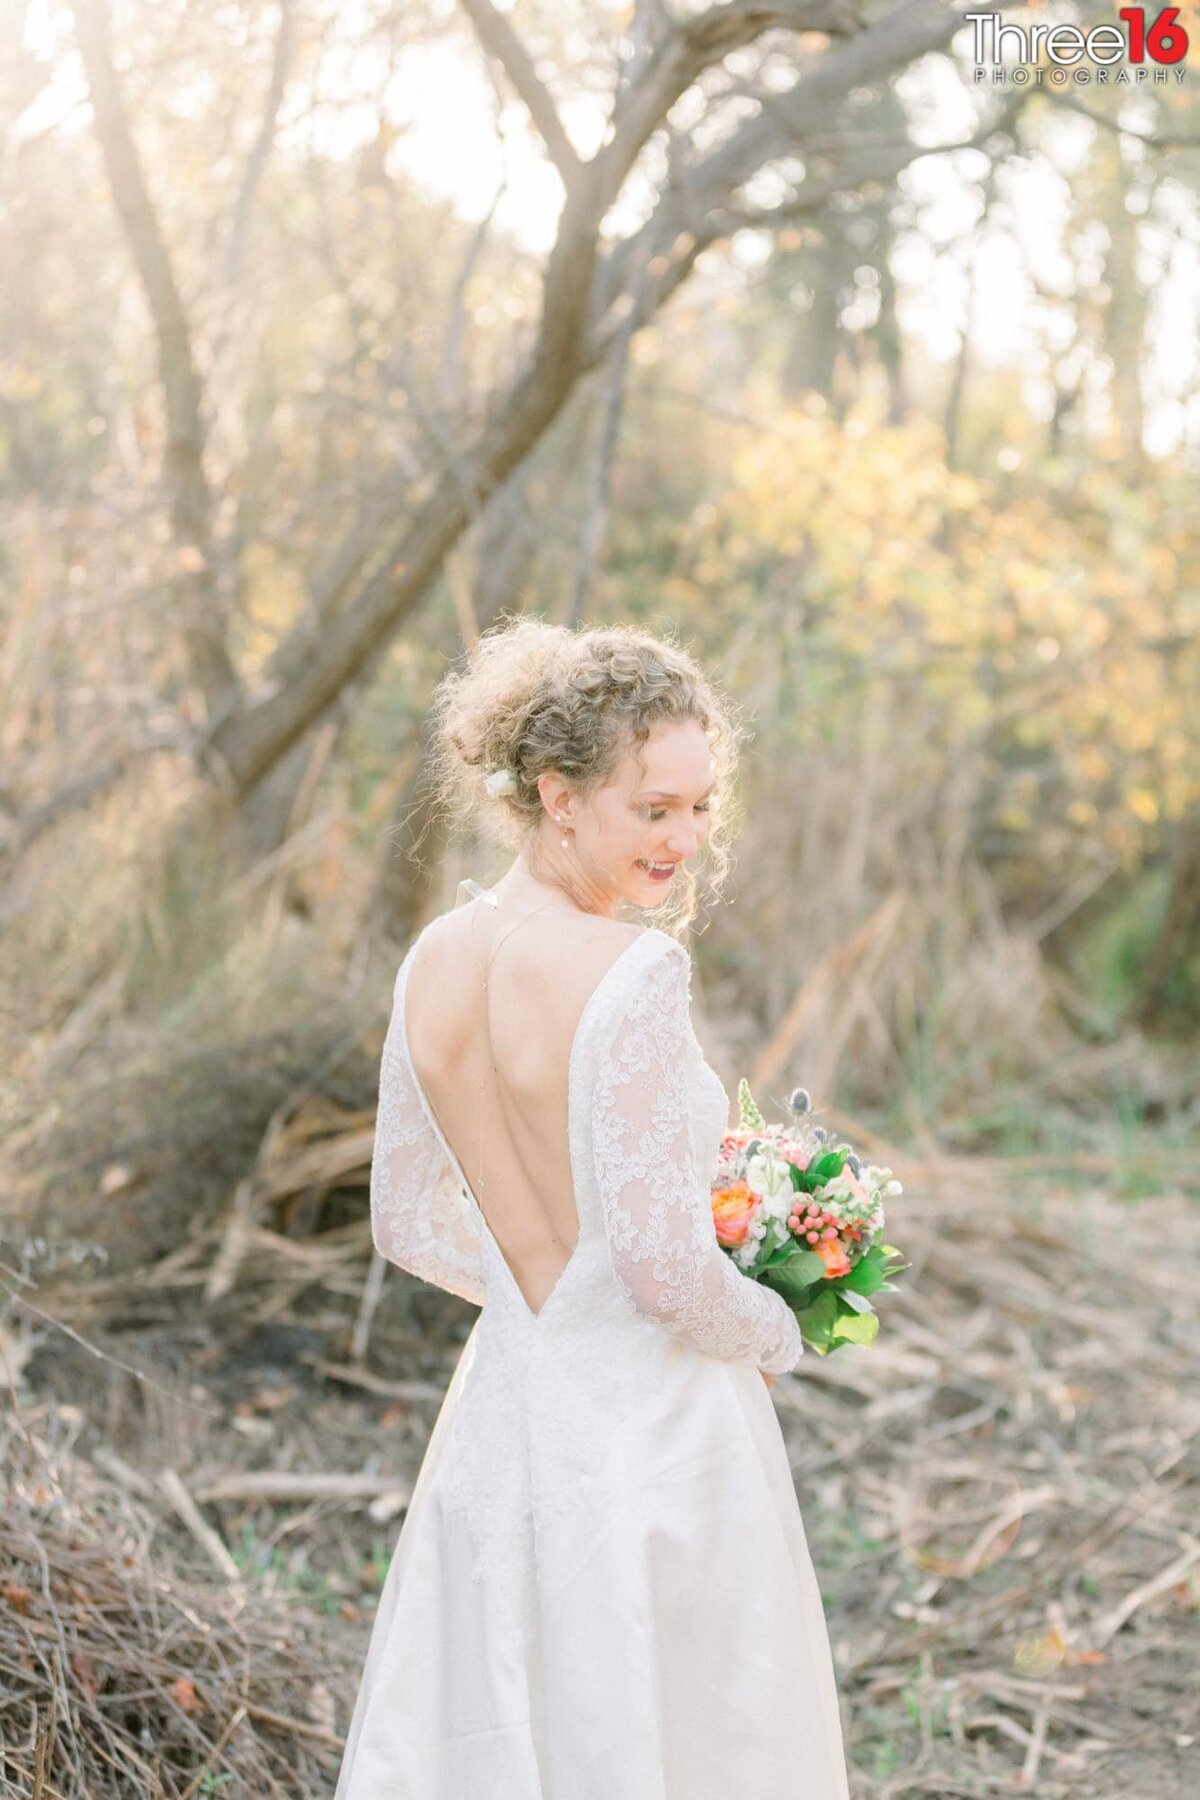 Bride poses with her back to the camera as she turns her head towards the wedding photographer